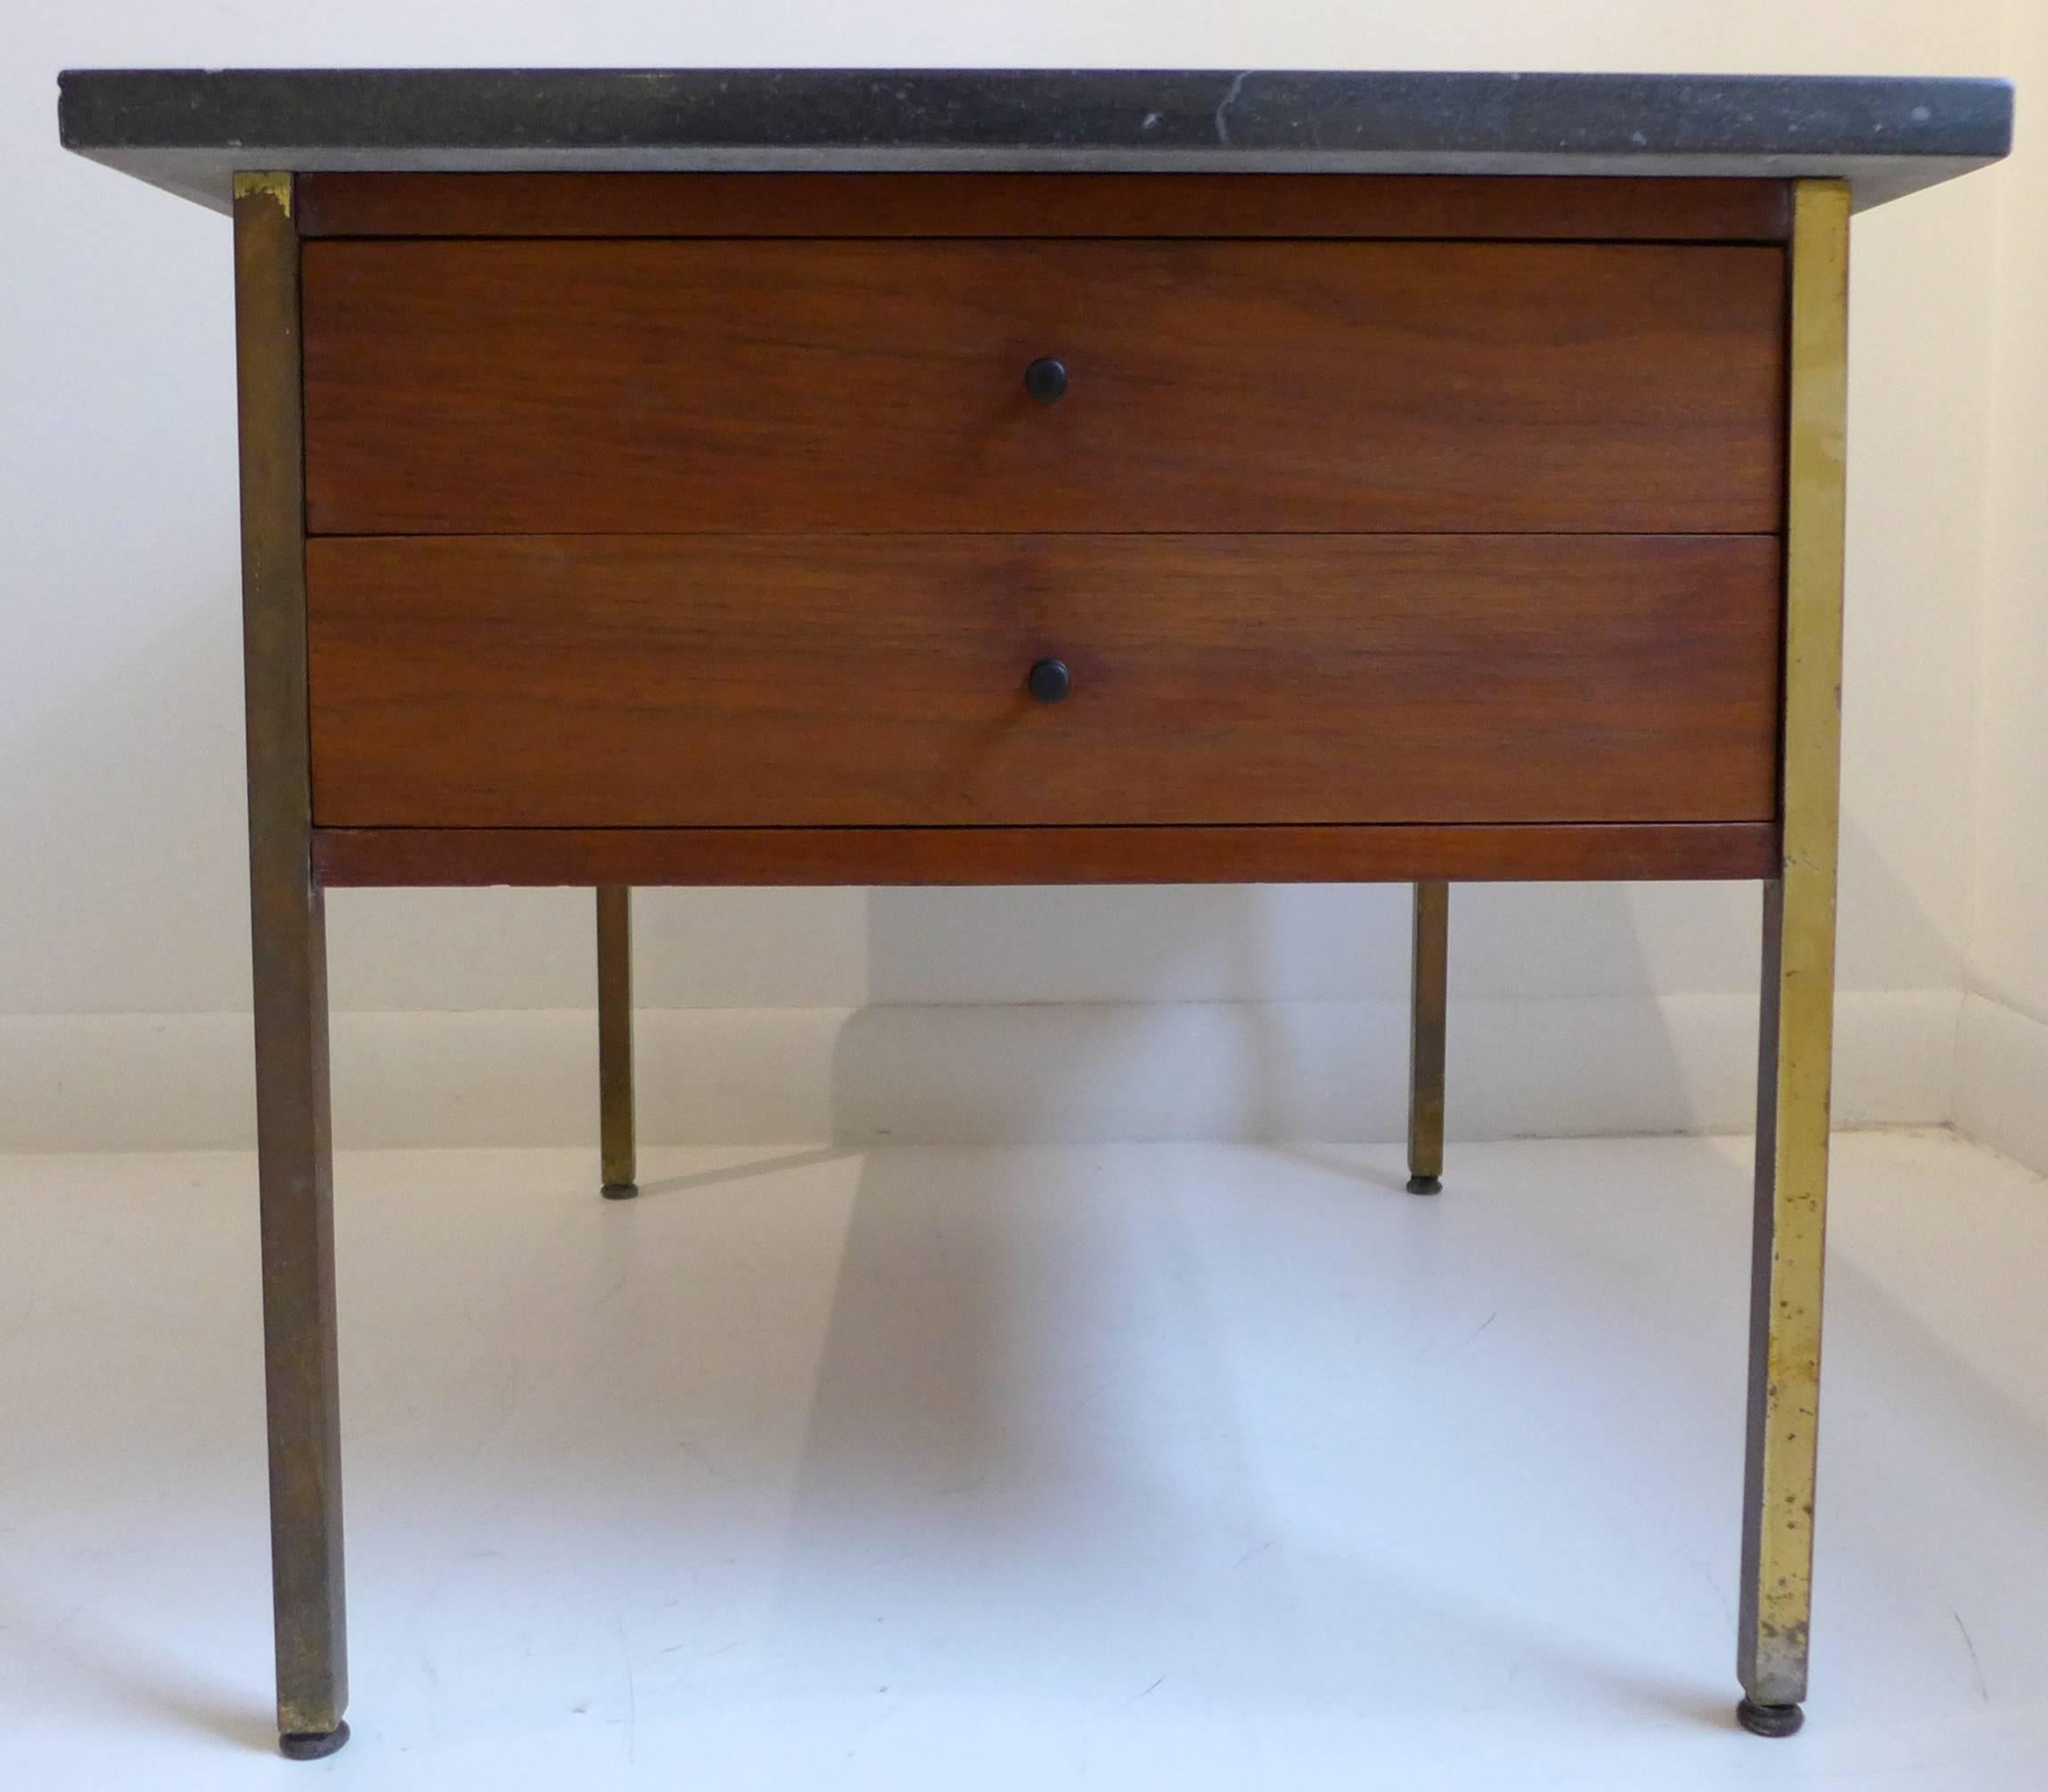 Side table or end table in walnut with brass legs, turned wooden pulls, and a travertine marble top. Designed by Milo Baughman for Arch Gordon, circa 1957. A nicely produced Baughman design, rarely seen compared to his work for Thayer-Coggin. Ref: